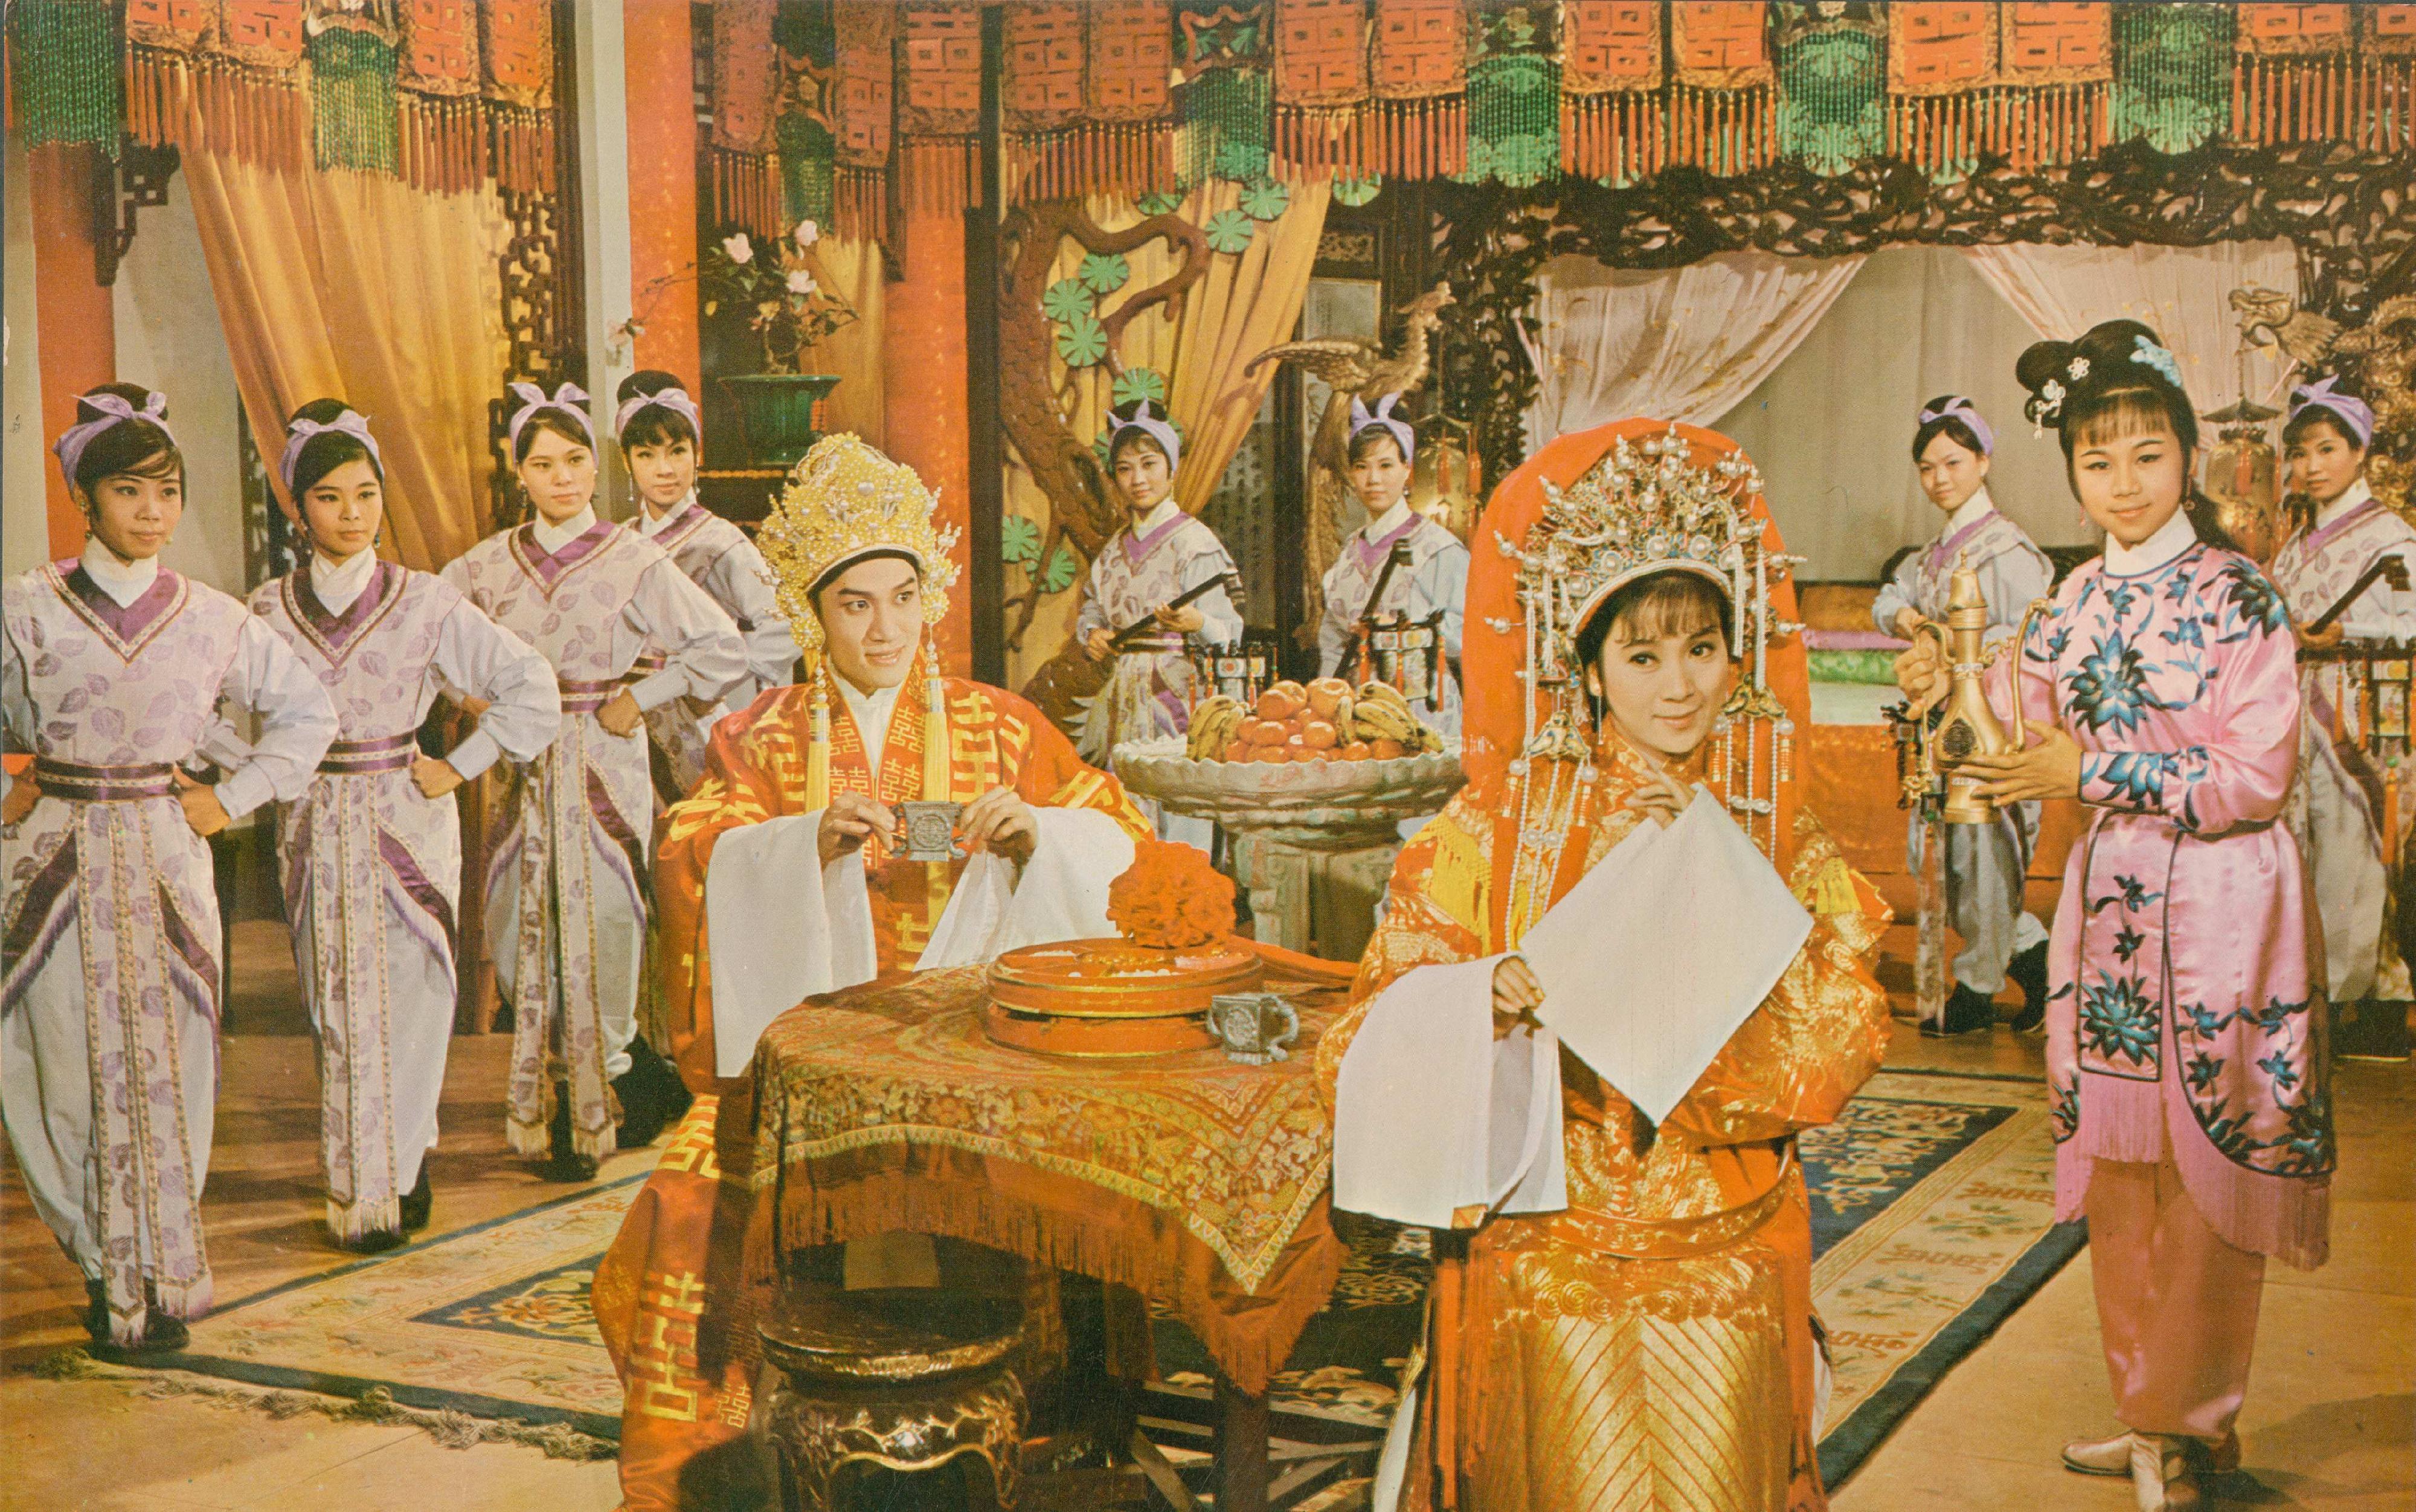 In support of the 20th anniversary of Cantonese Opera Day, the Hong Kong Film Archive (HKFA) of the Leisure and Cultural Services Department will screen two Cantonese opera films starring Yam Kim-fai and Connie Chan Po-chu on November 26 and 27 respectively at the HKFA Cinema, allowing audiences to review the wonderful artistry of the duo, "Opera Fans' Lover" and the "Movie-fan Princess". Photo shows a film still of "The Story of Heroine Fan Lei-fa" (1968).